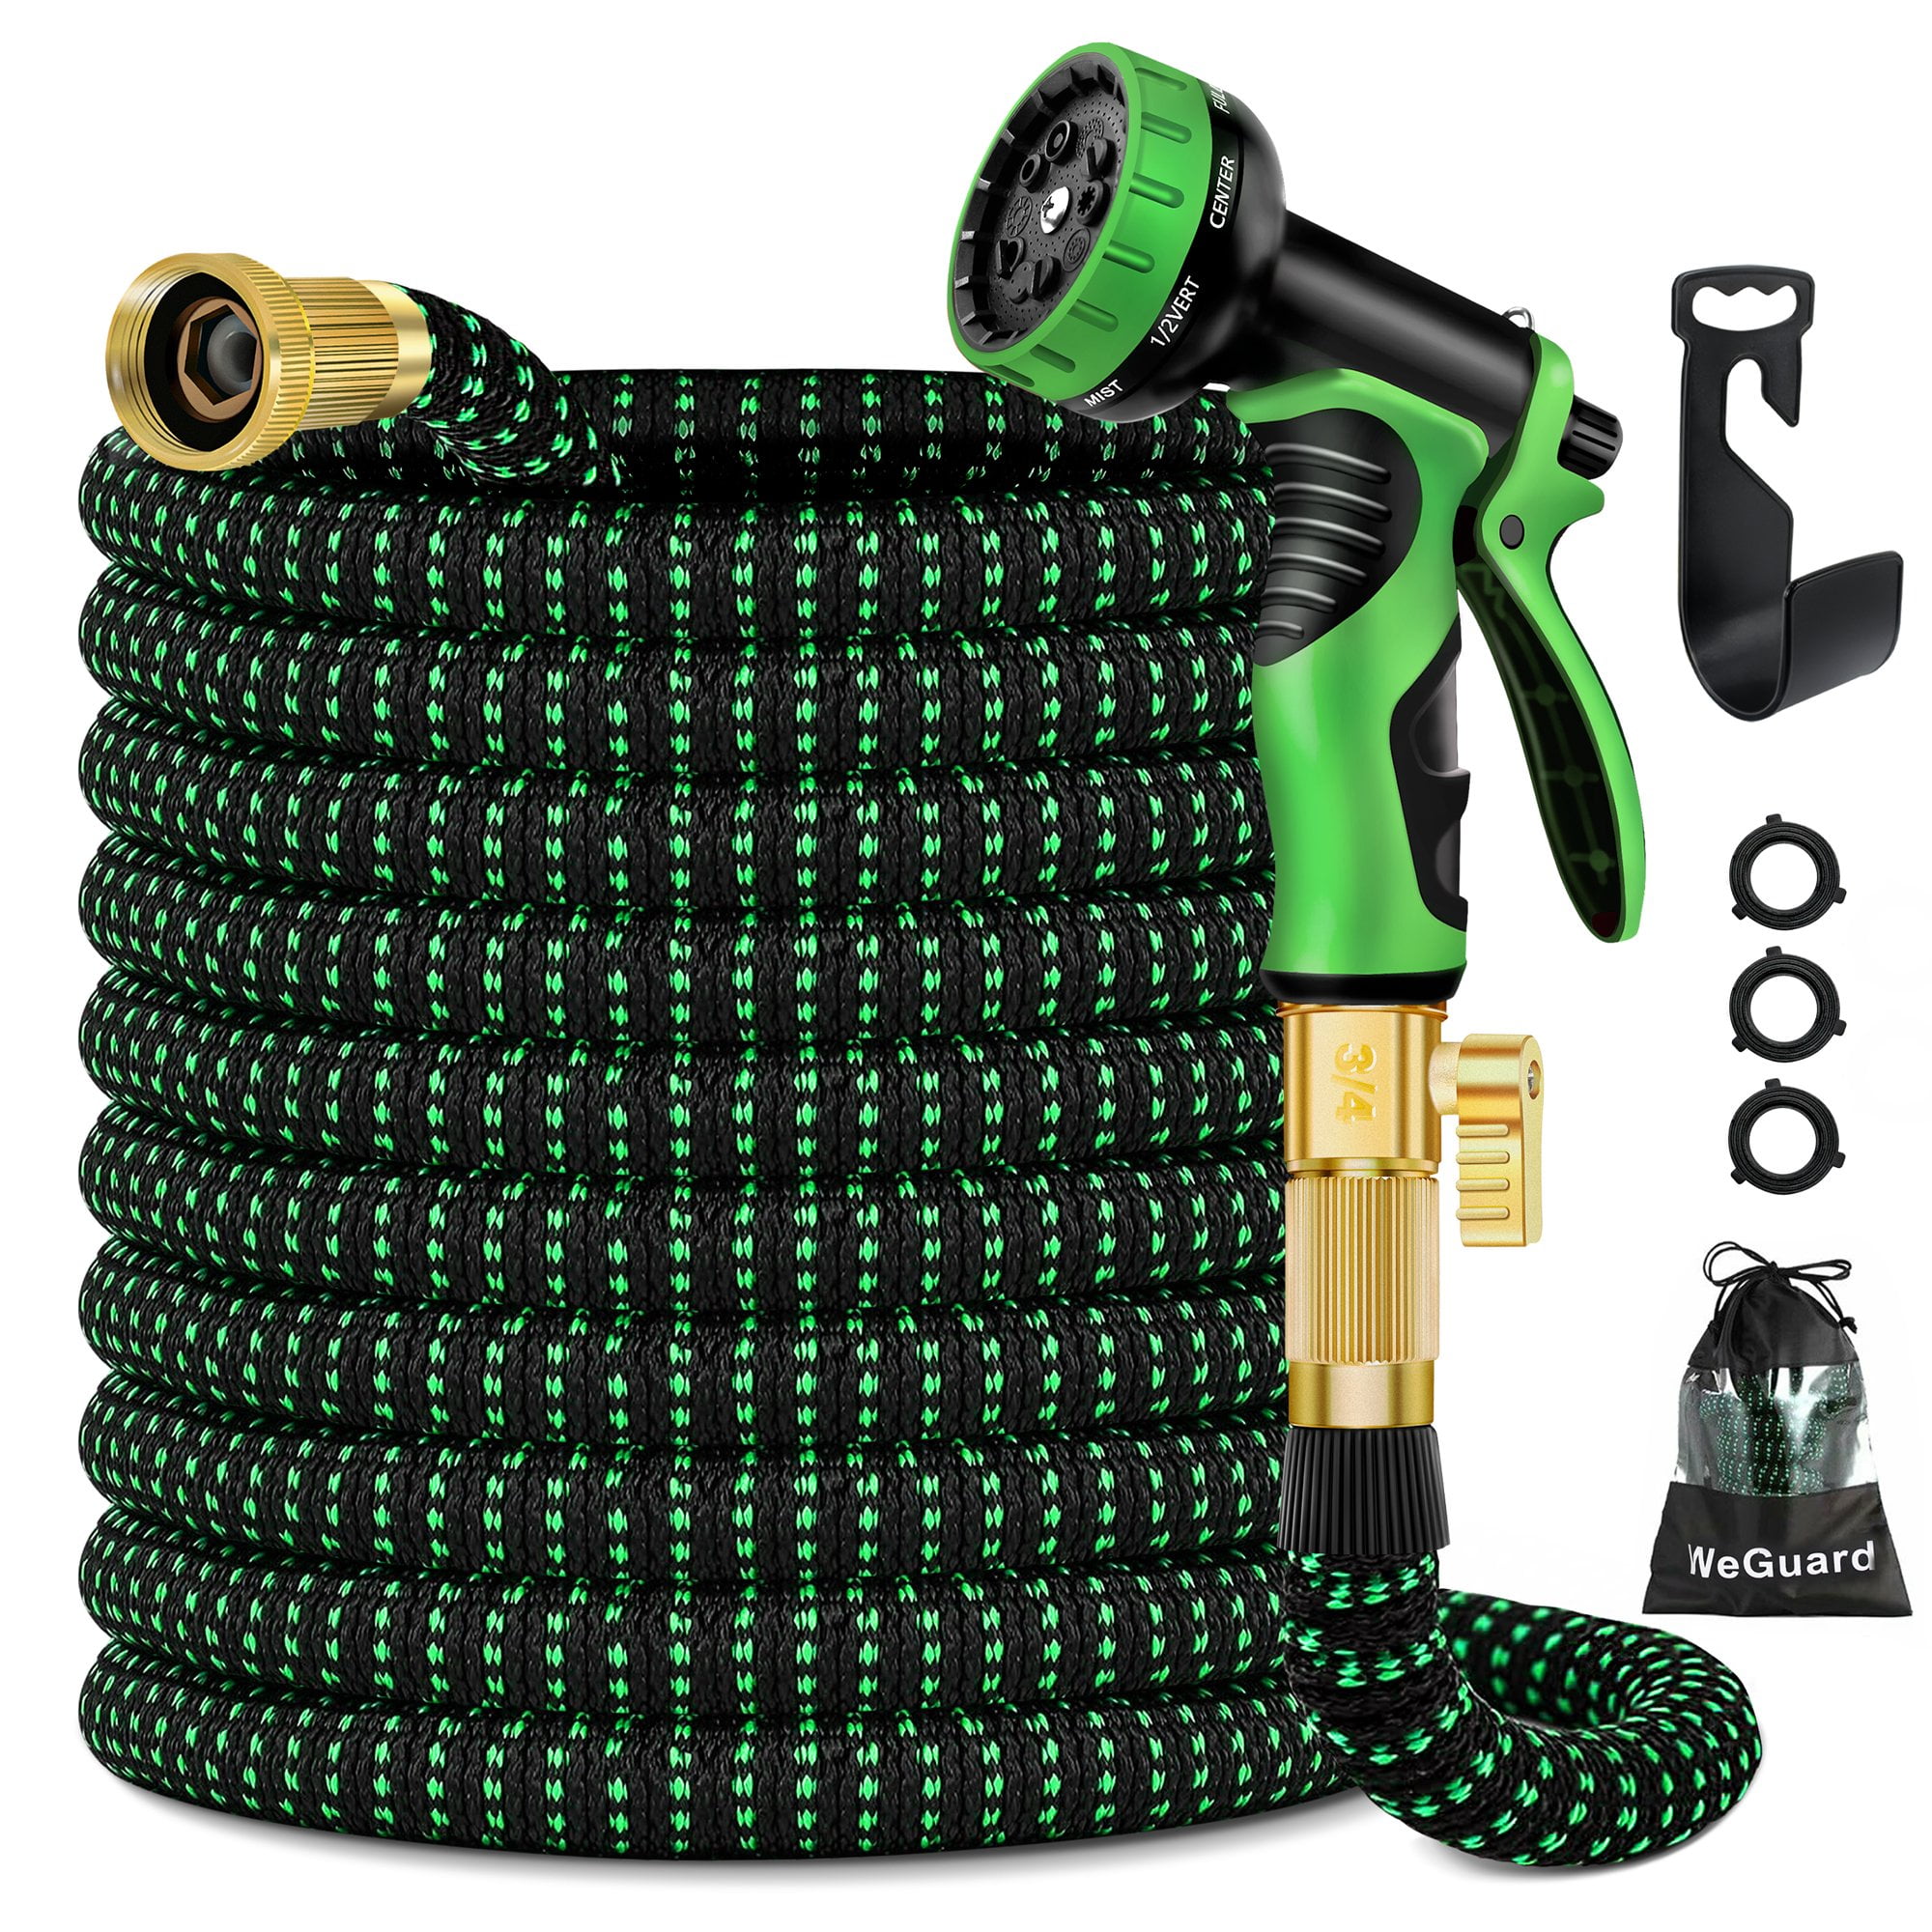 3/4 Solid Brass Fittings Premium 3750D Fabric Flexible Water Hose with Durable 3-Layers Latex Core TONGLUBAO Expandable Garden Hose 100ft Leakproof Garden Hose with 9 Function Spray Nozzle